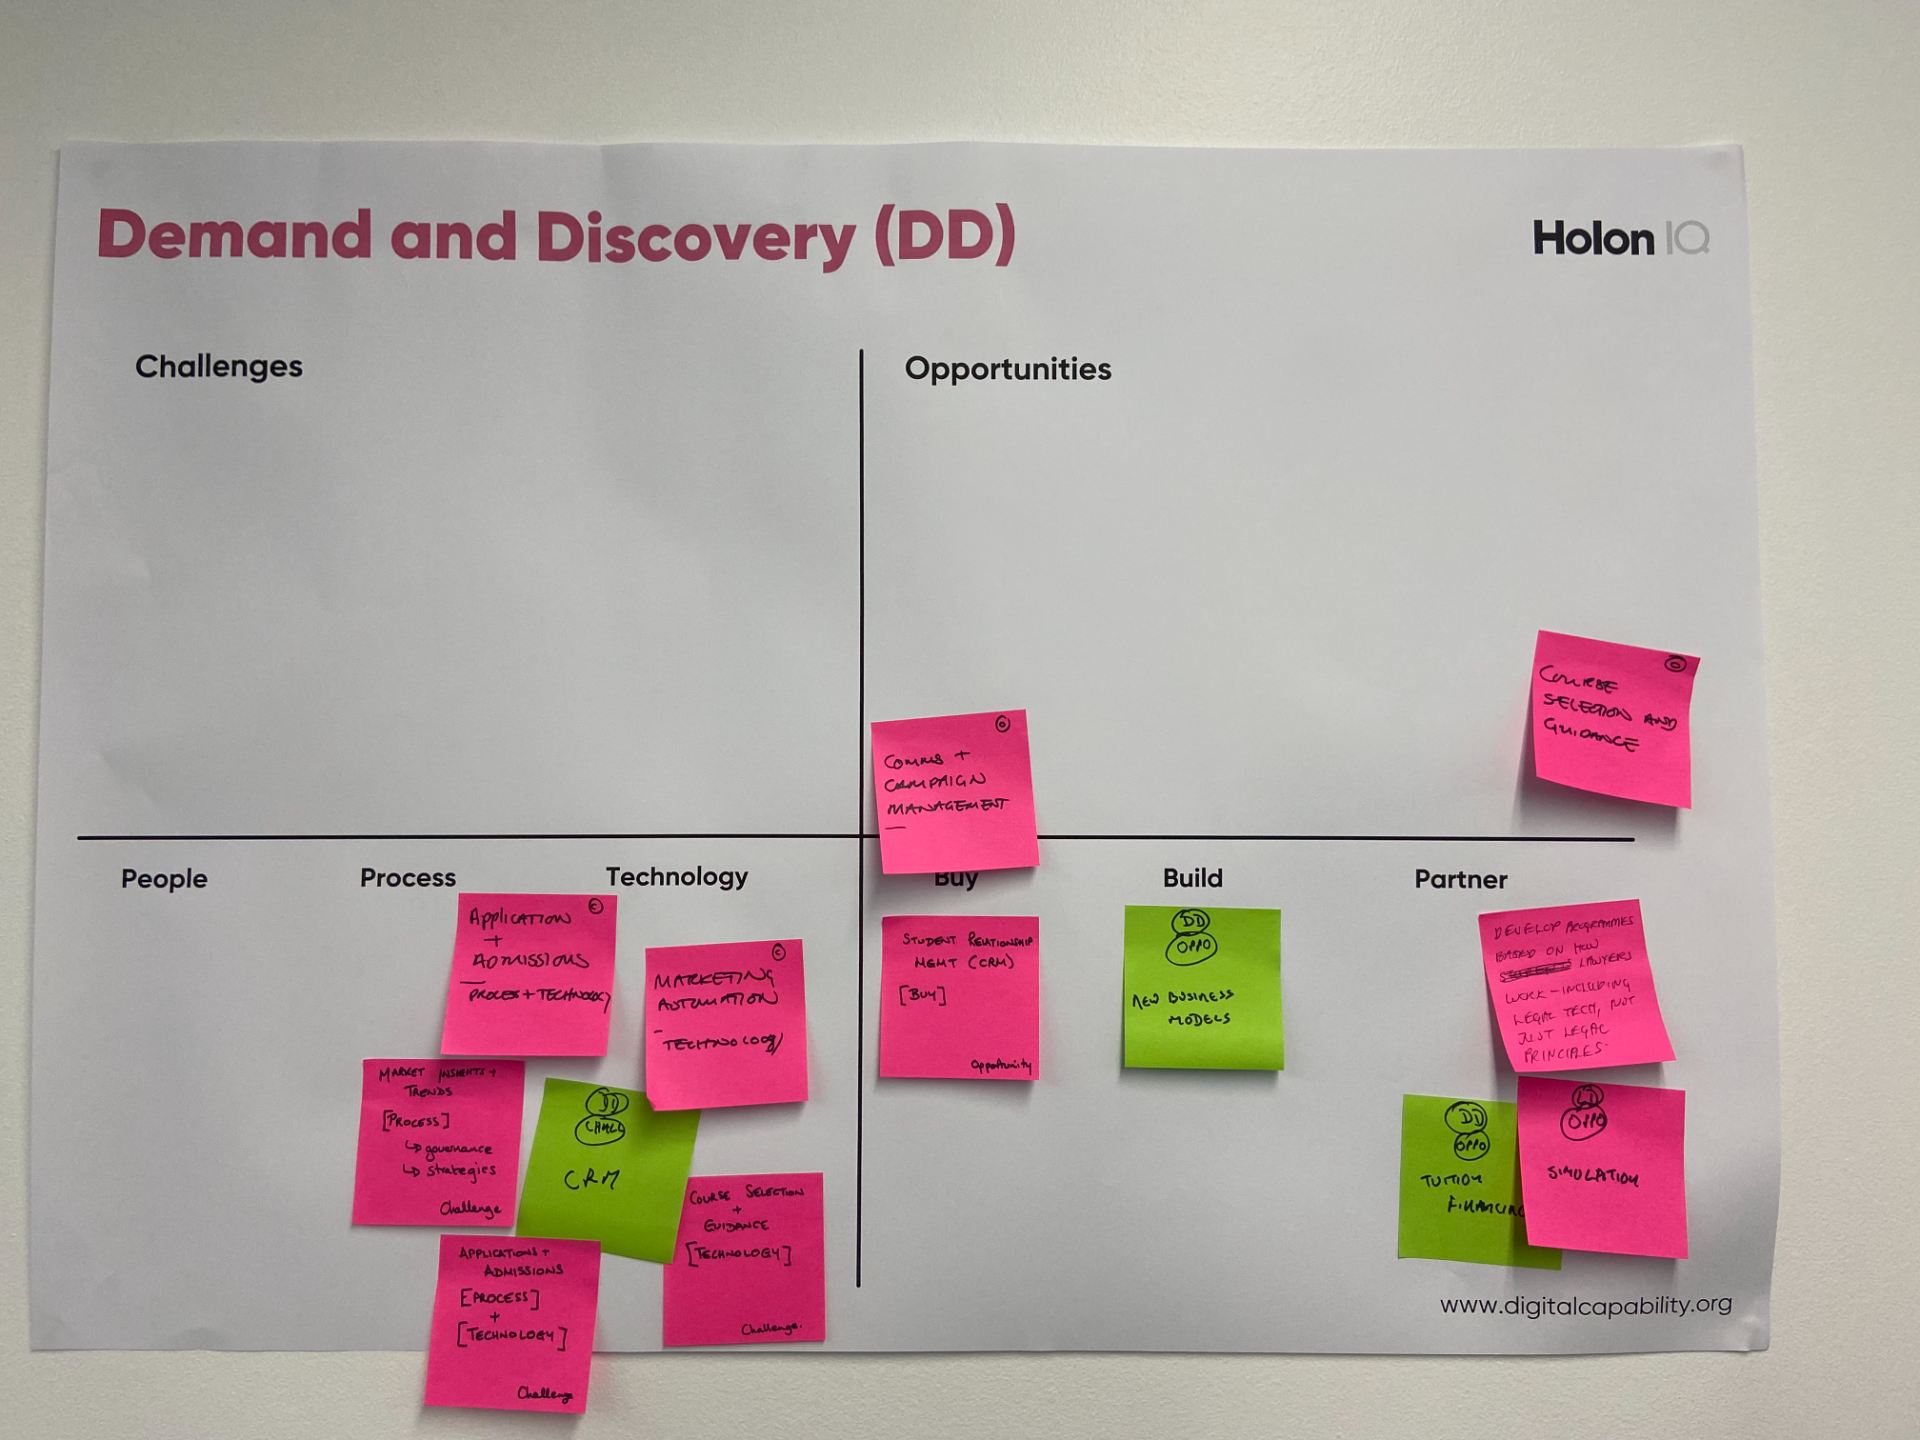 Demand and Discovery (DD) poster dividing the page into four quadrants. Top left: challenges. Bottom left: "People, Process, Technology". Top right: opportunities. Bottom right: 'Buy, Build, Partner'. Post-it notes appear in the bottom right quadrant.